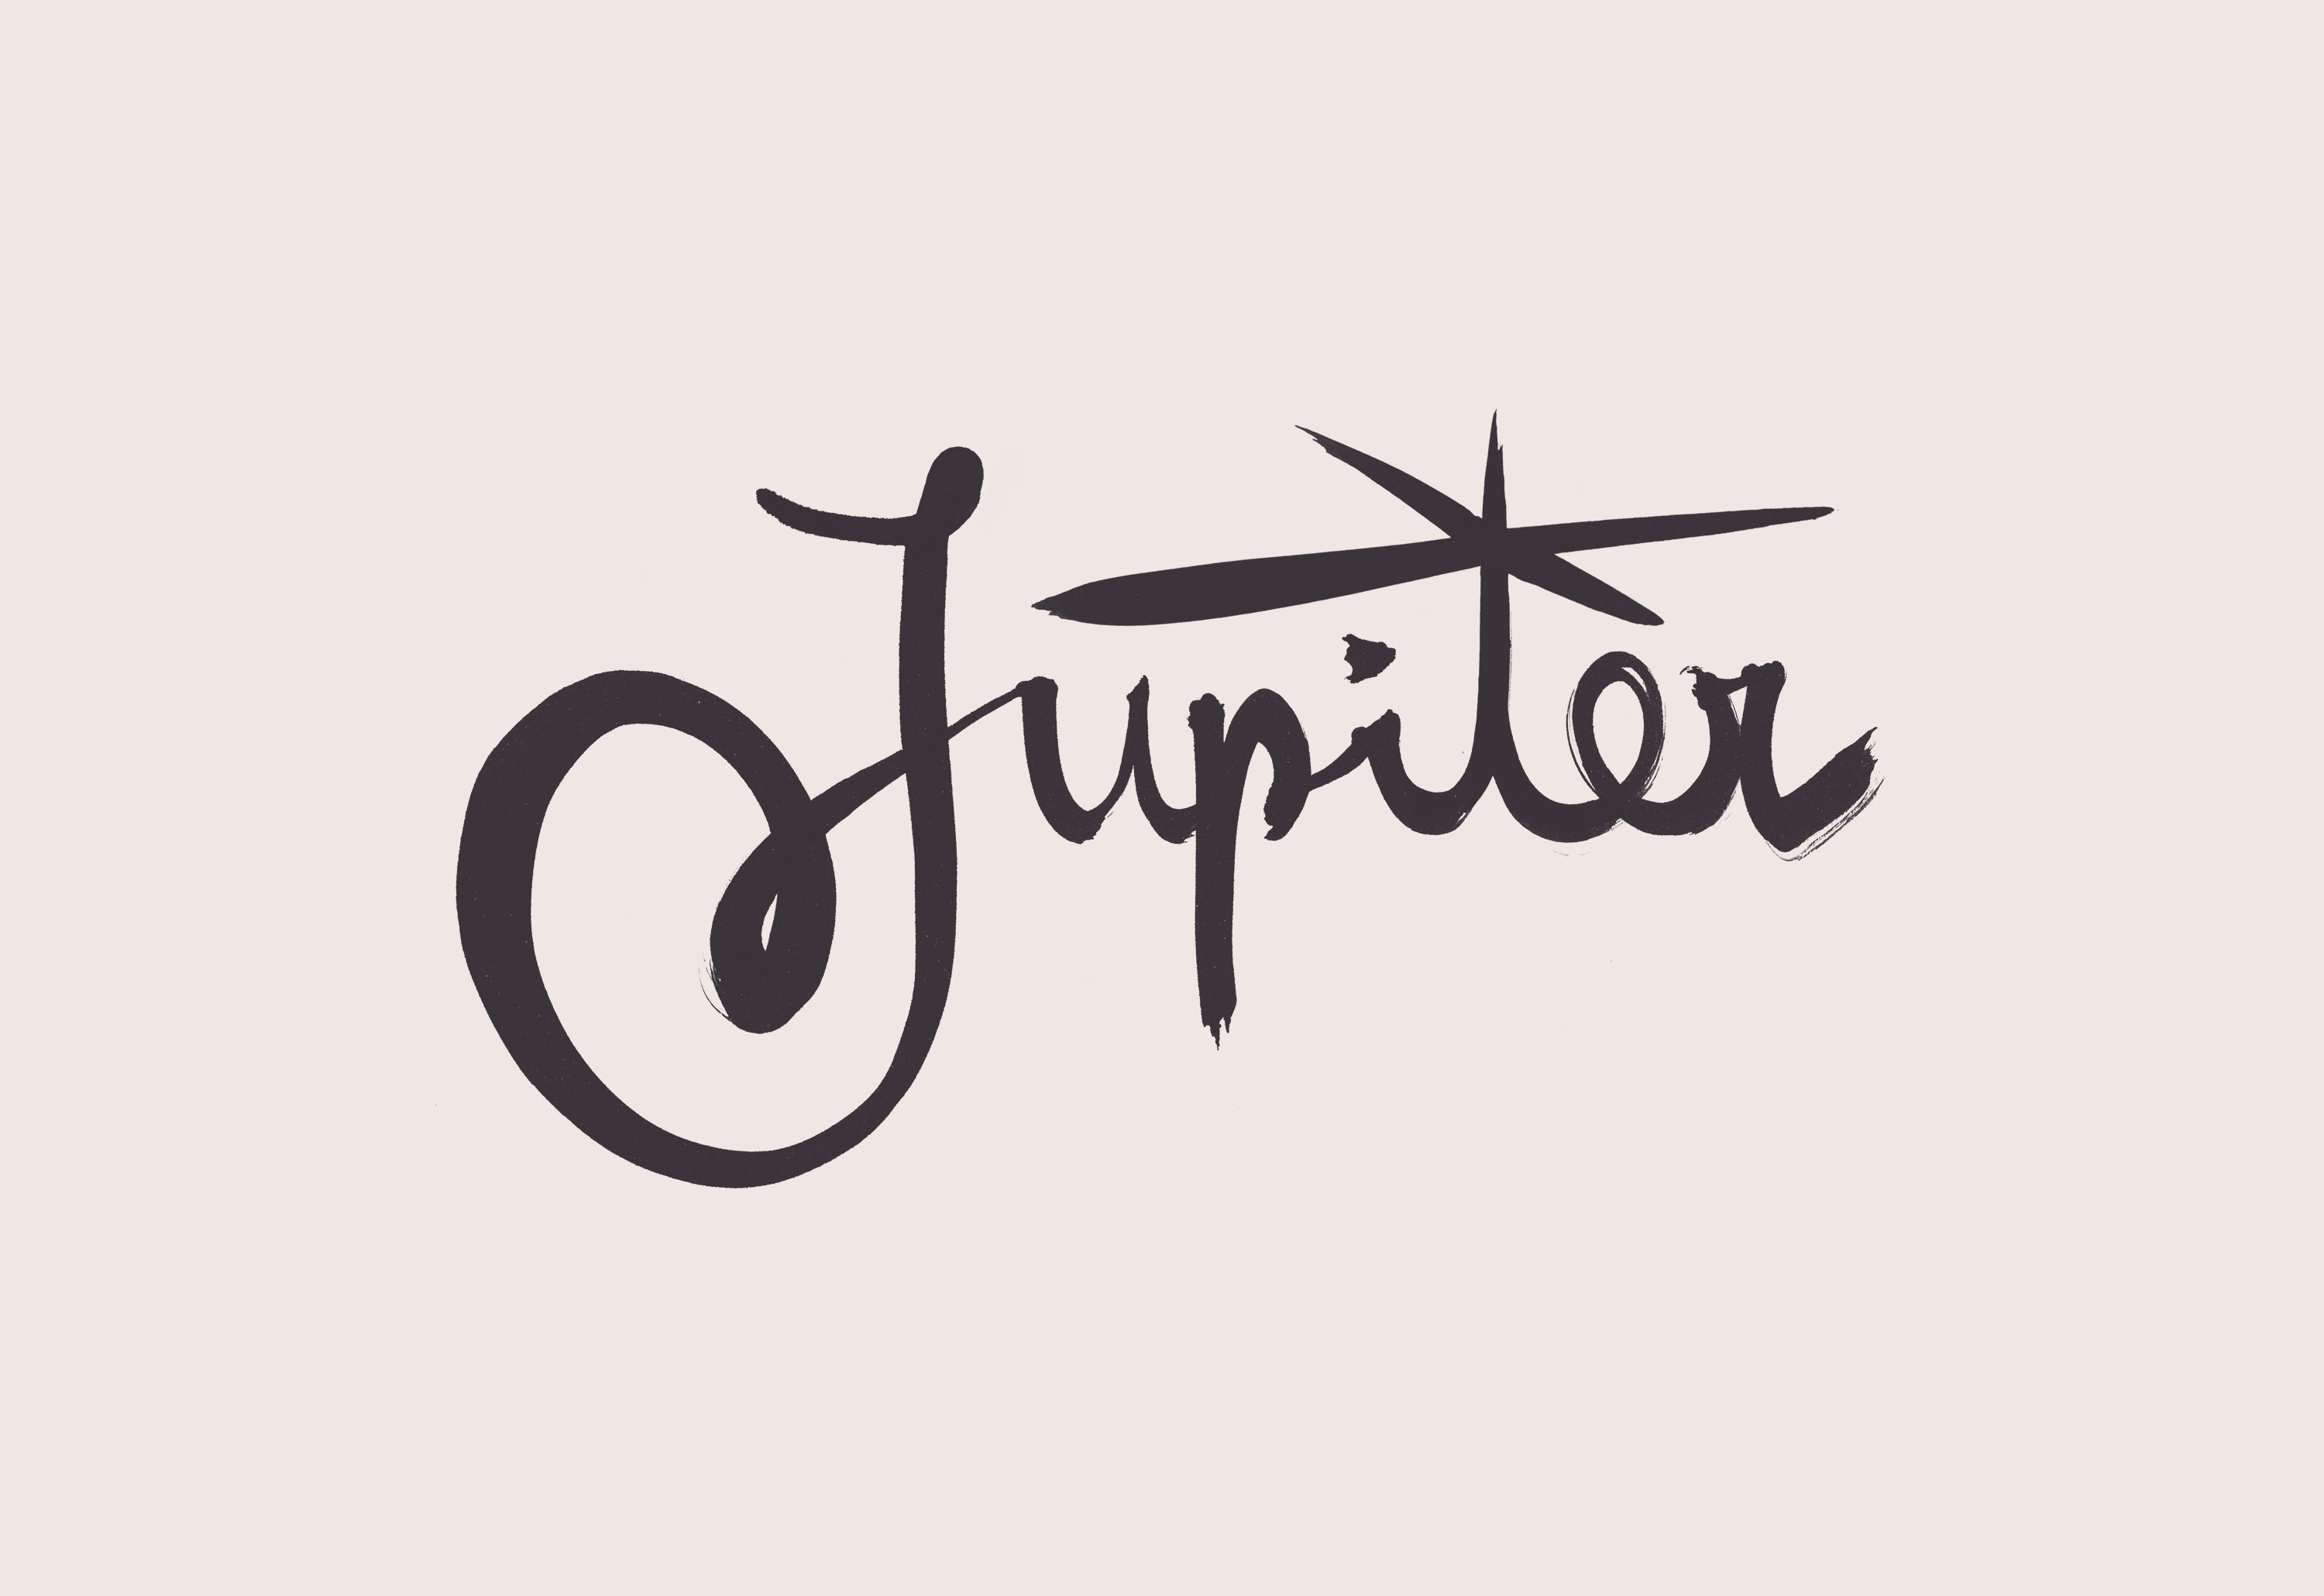 New logotype, brand identity, packaging and signage for New York restaurant Jupiter designed by Triboro